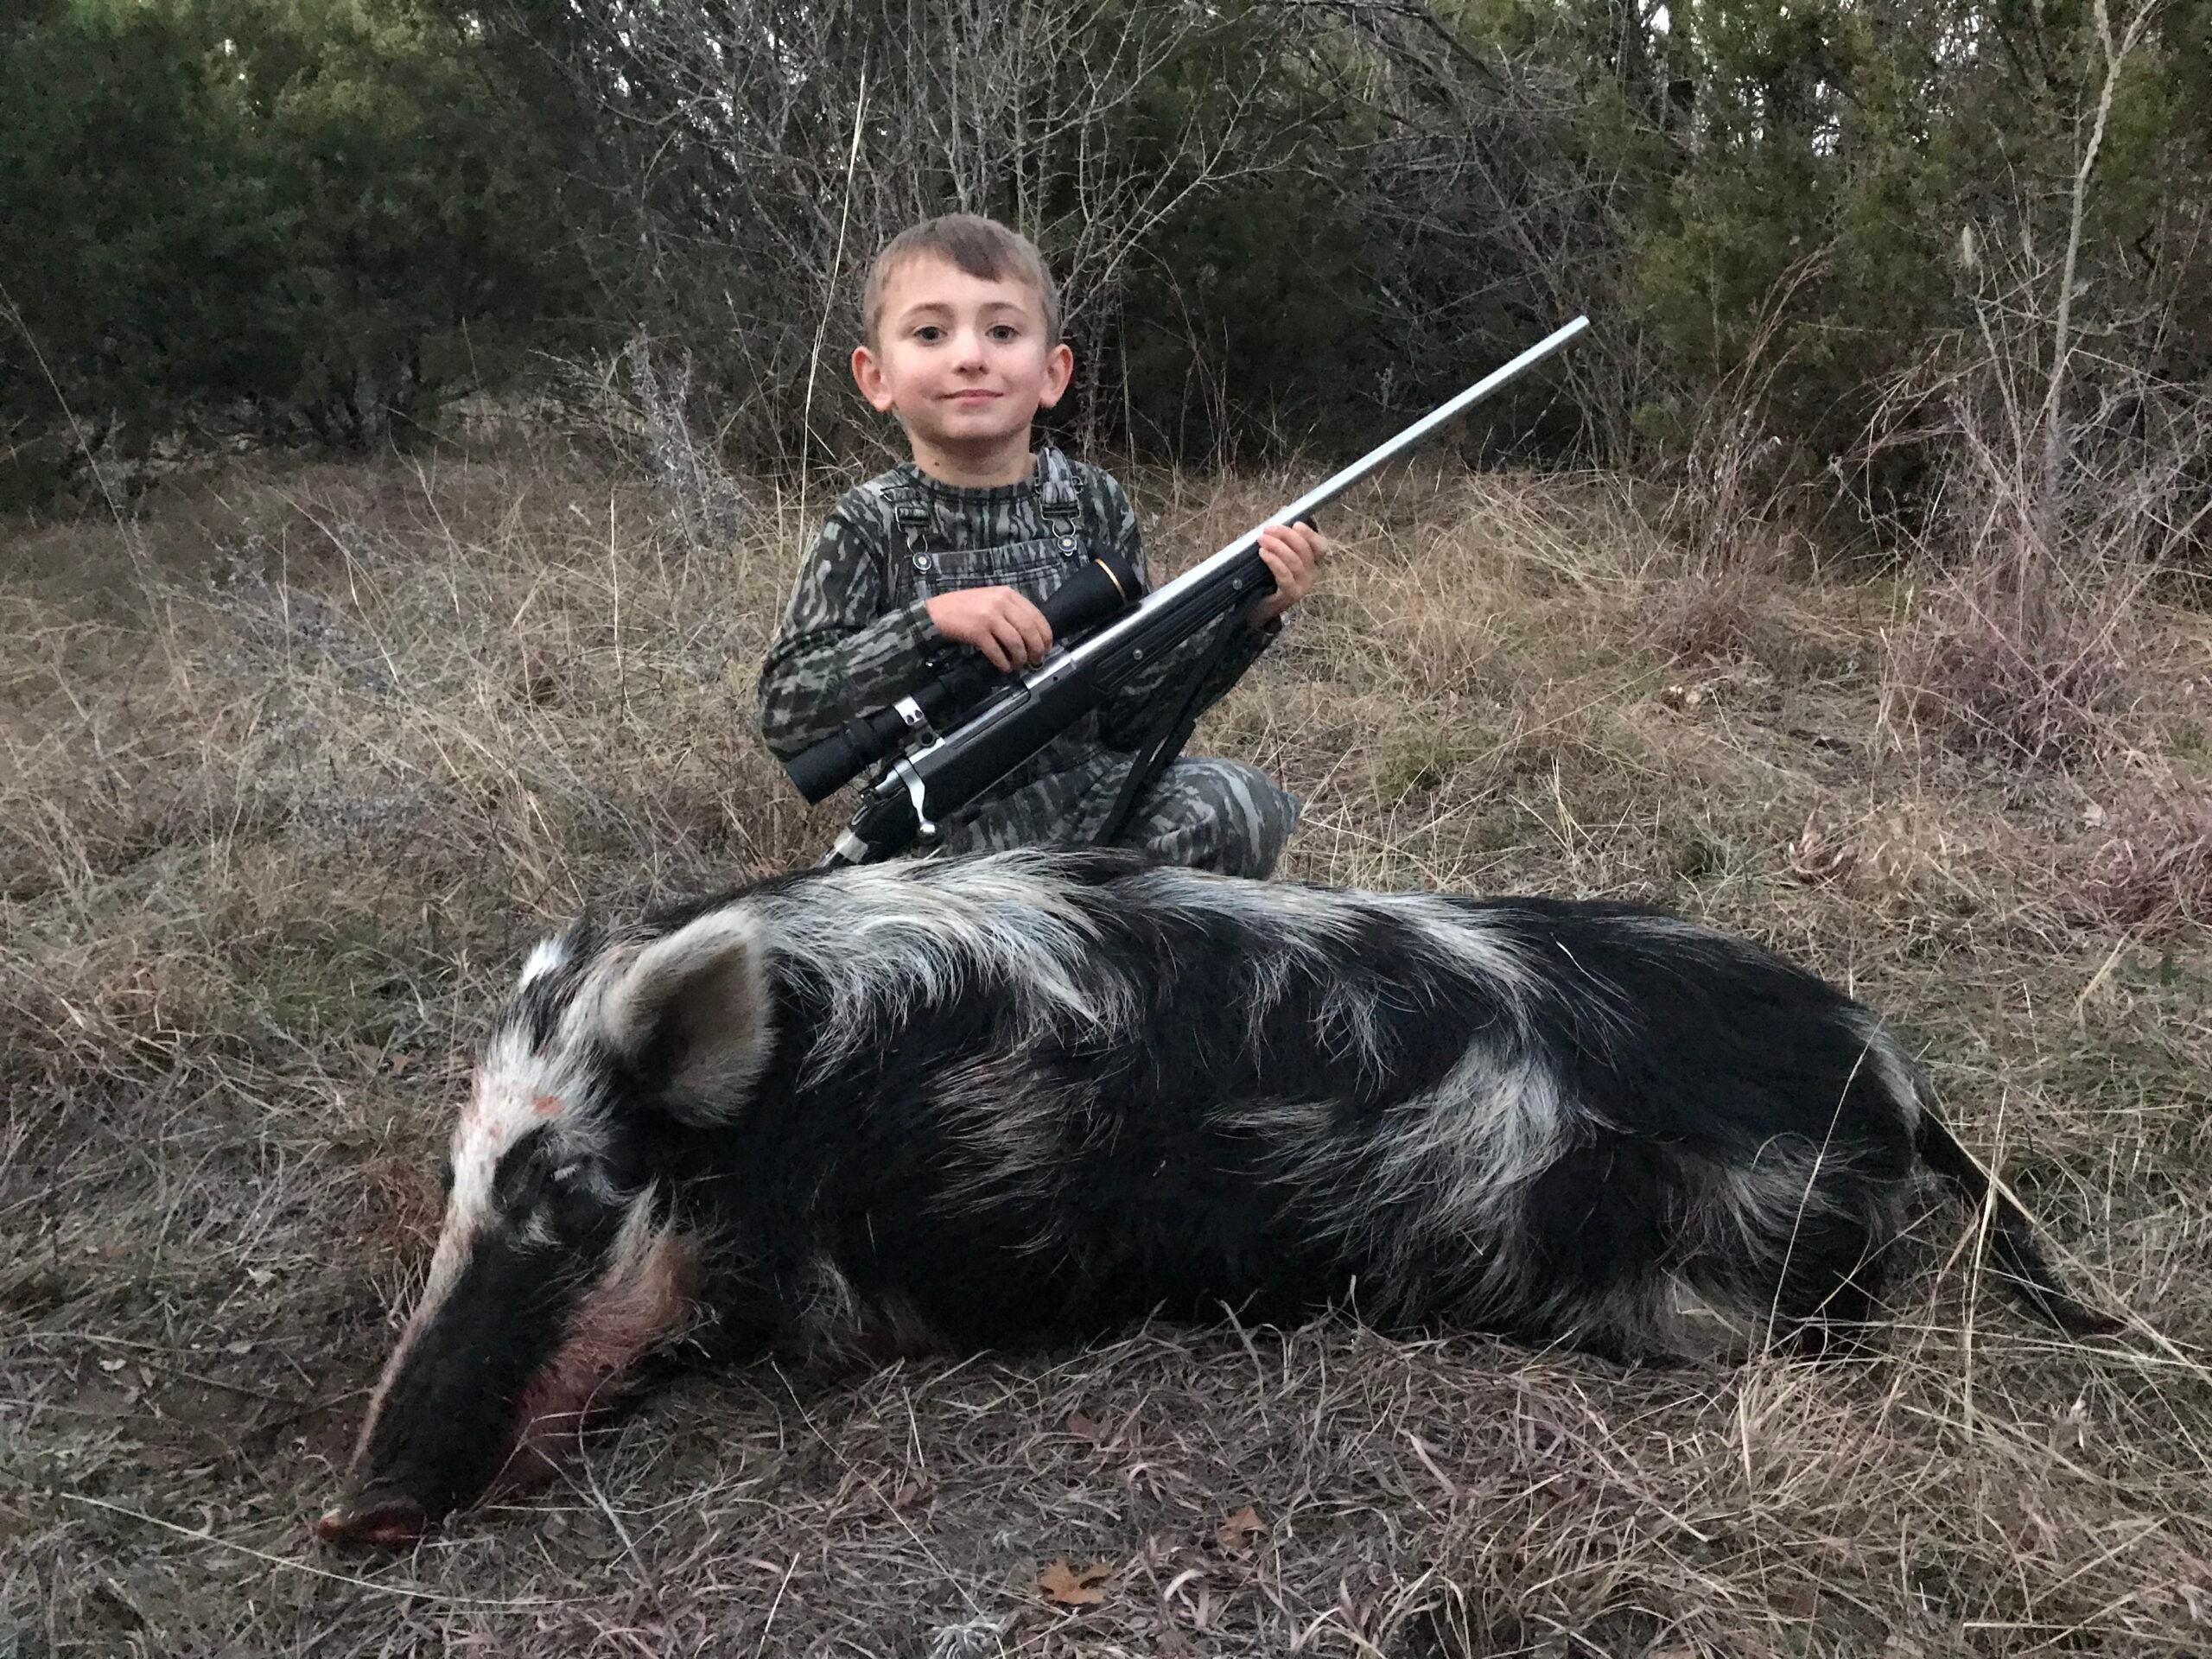 Boy with a rifle sitting next to a dead pig.